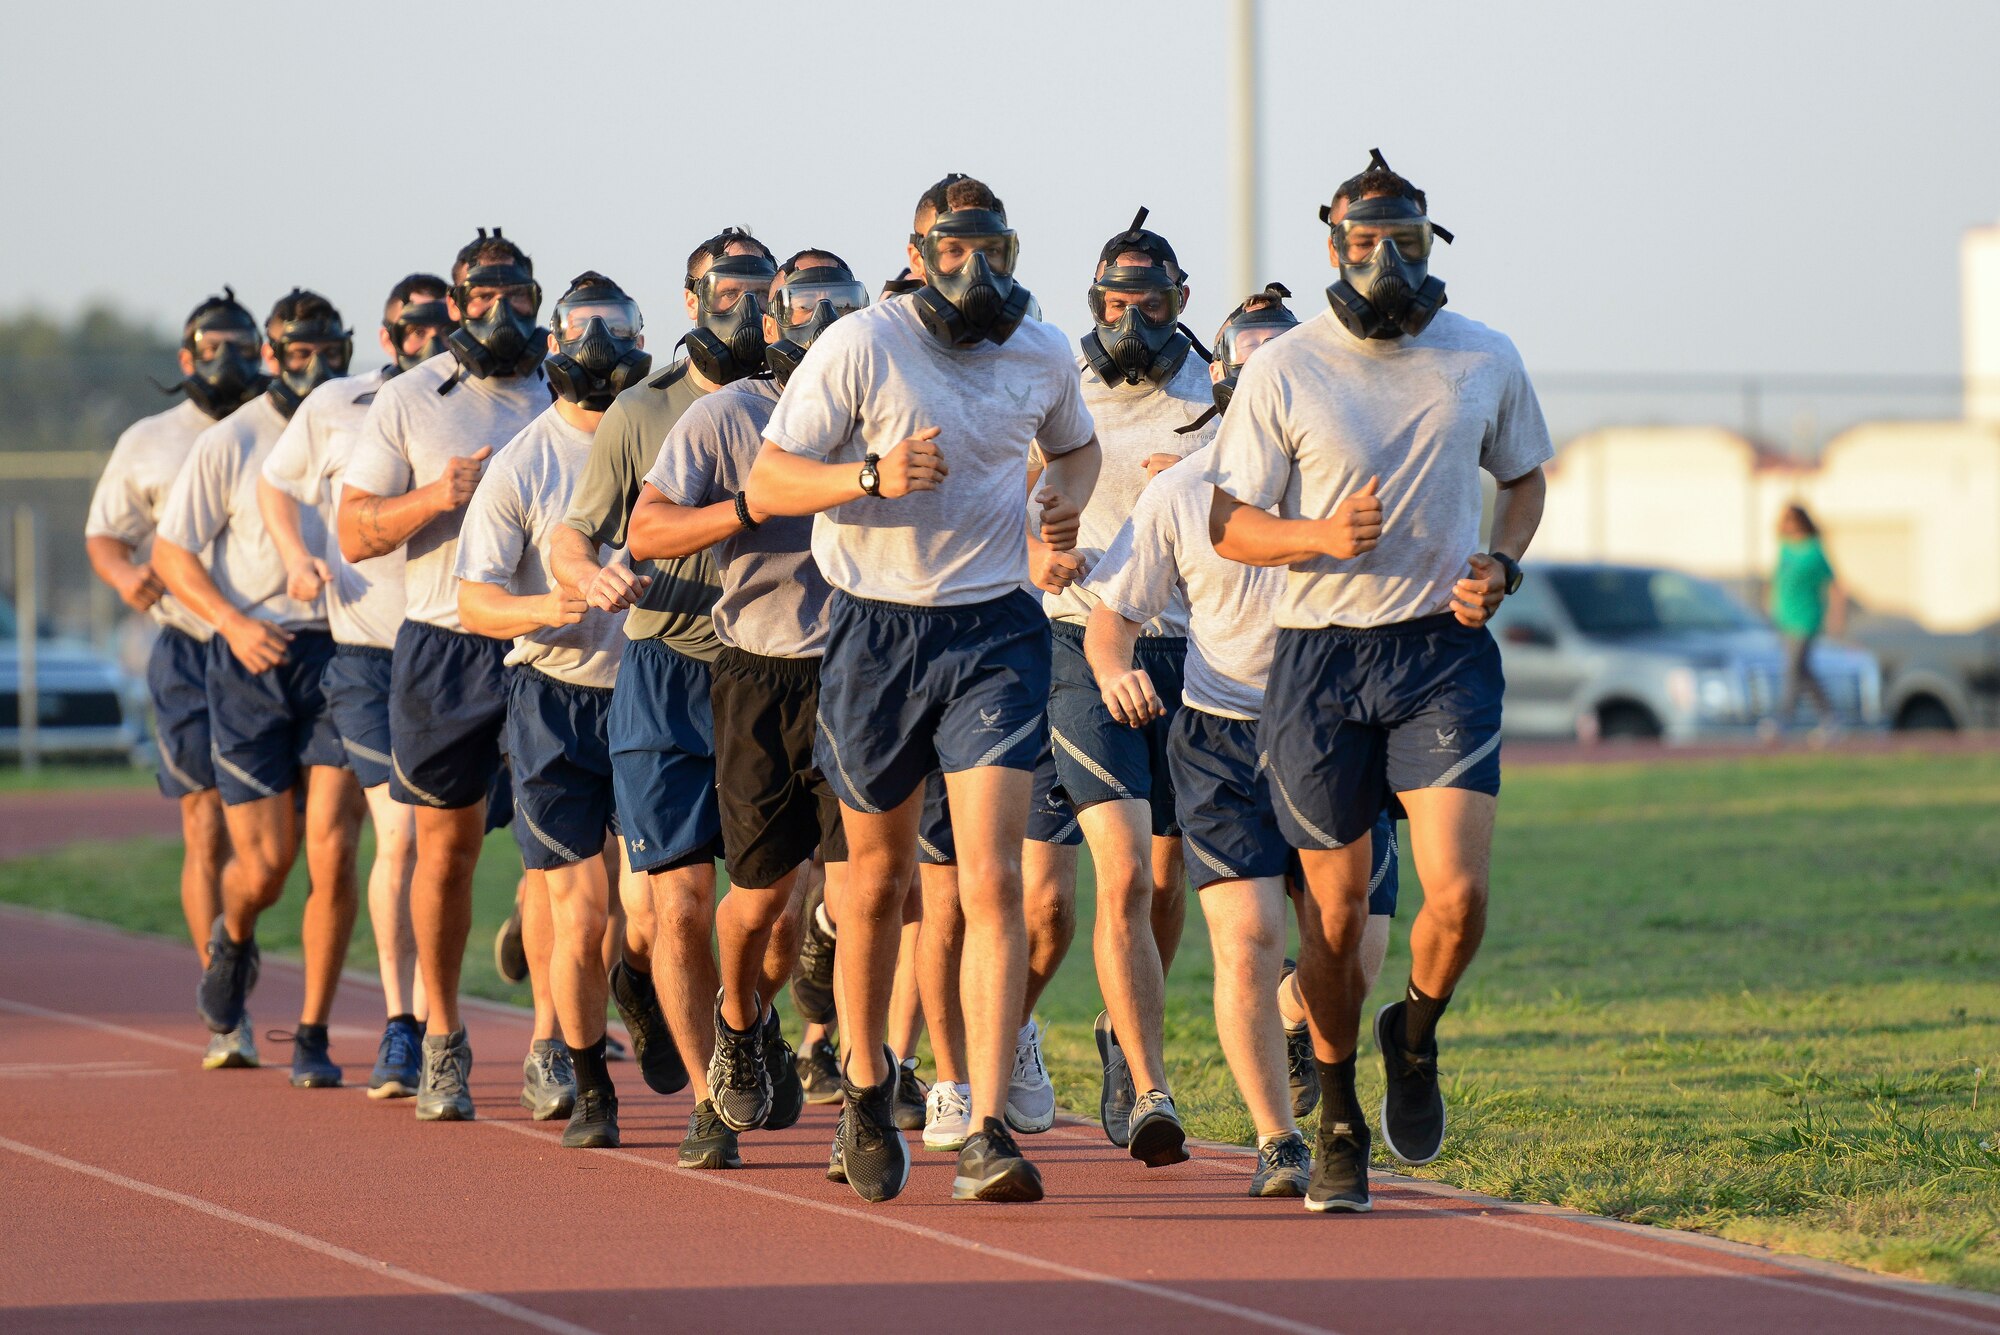 Air Education and Training Command Security Forces members wear gas masks as they preform physical exercises during AETC’s Defender Challenge team selection July 27, 2018, at Joint Base San Antonio-Randolph, Texas. Defender Challenge is a Security Forces competition that pits teams against each other in realistic weapons, dismounted operations and relay challenge events.